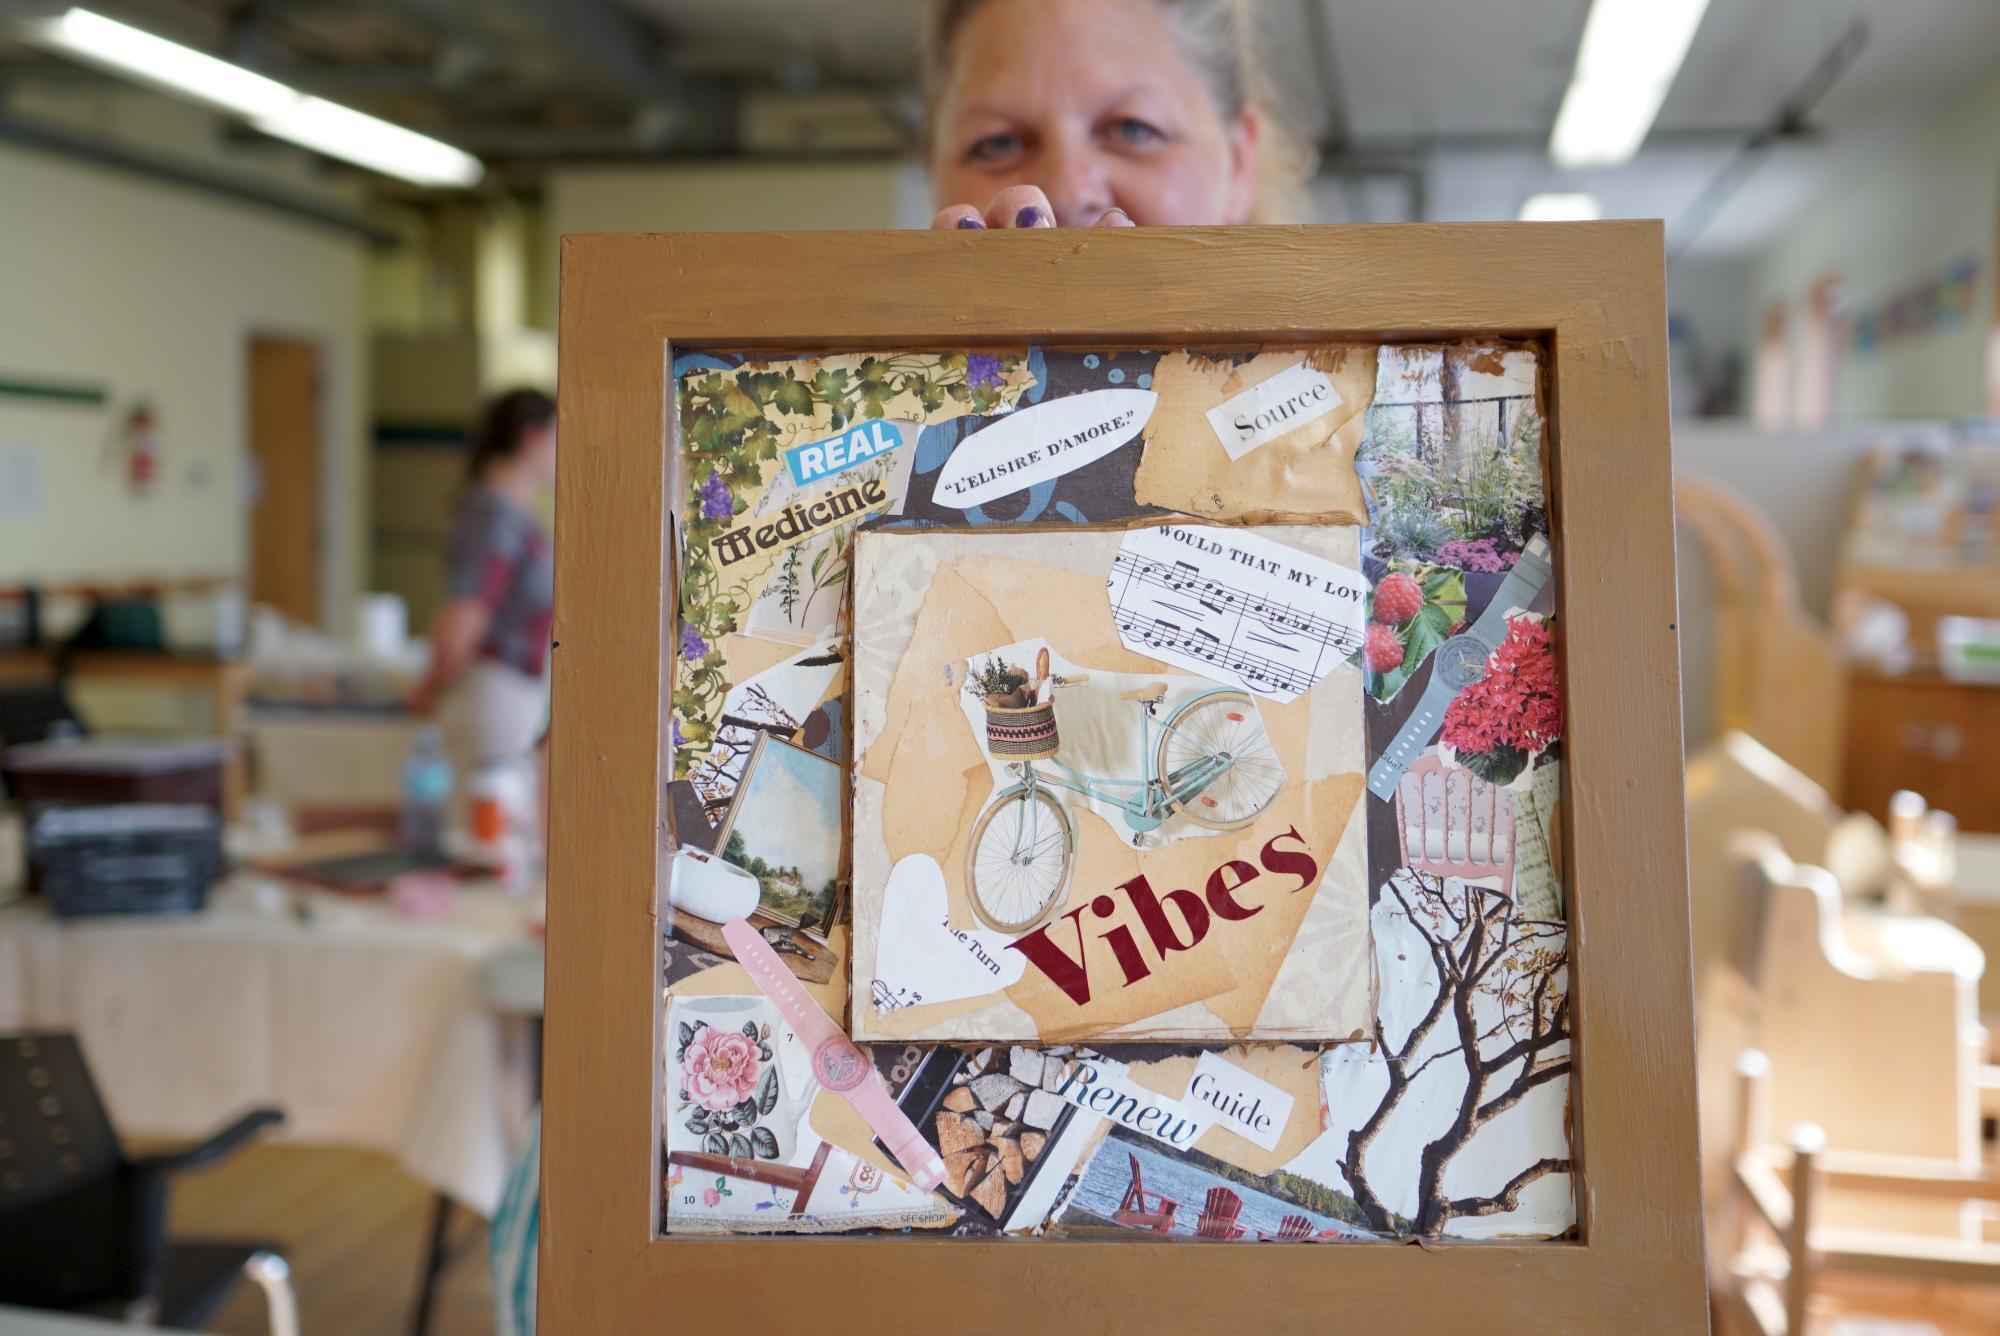 A woman holds up a framed collage with positive messages on it.